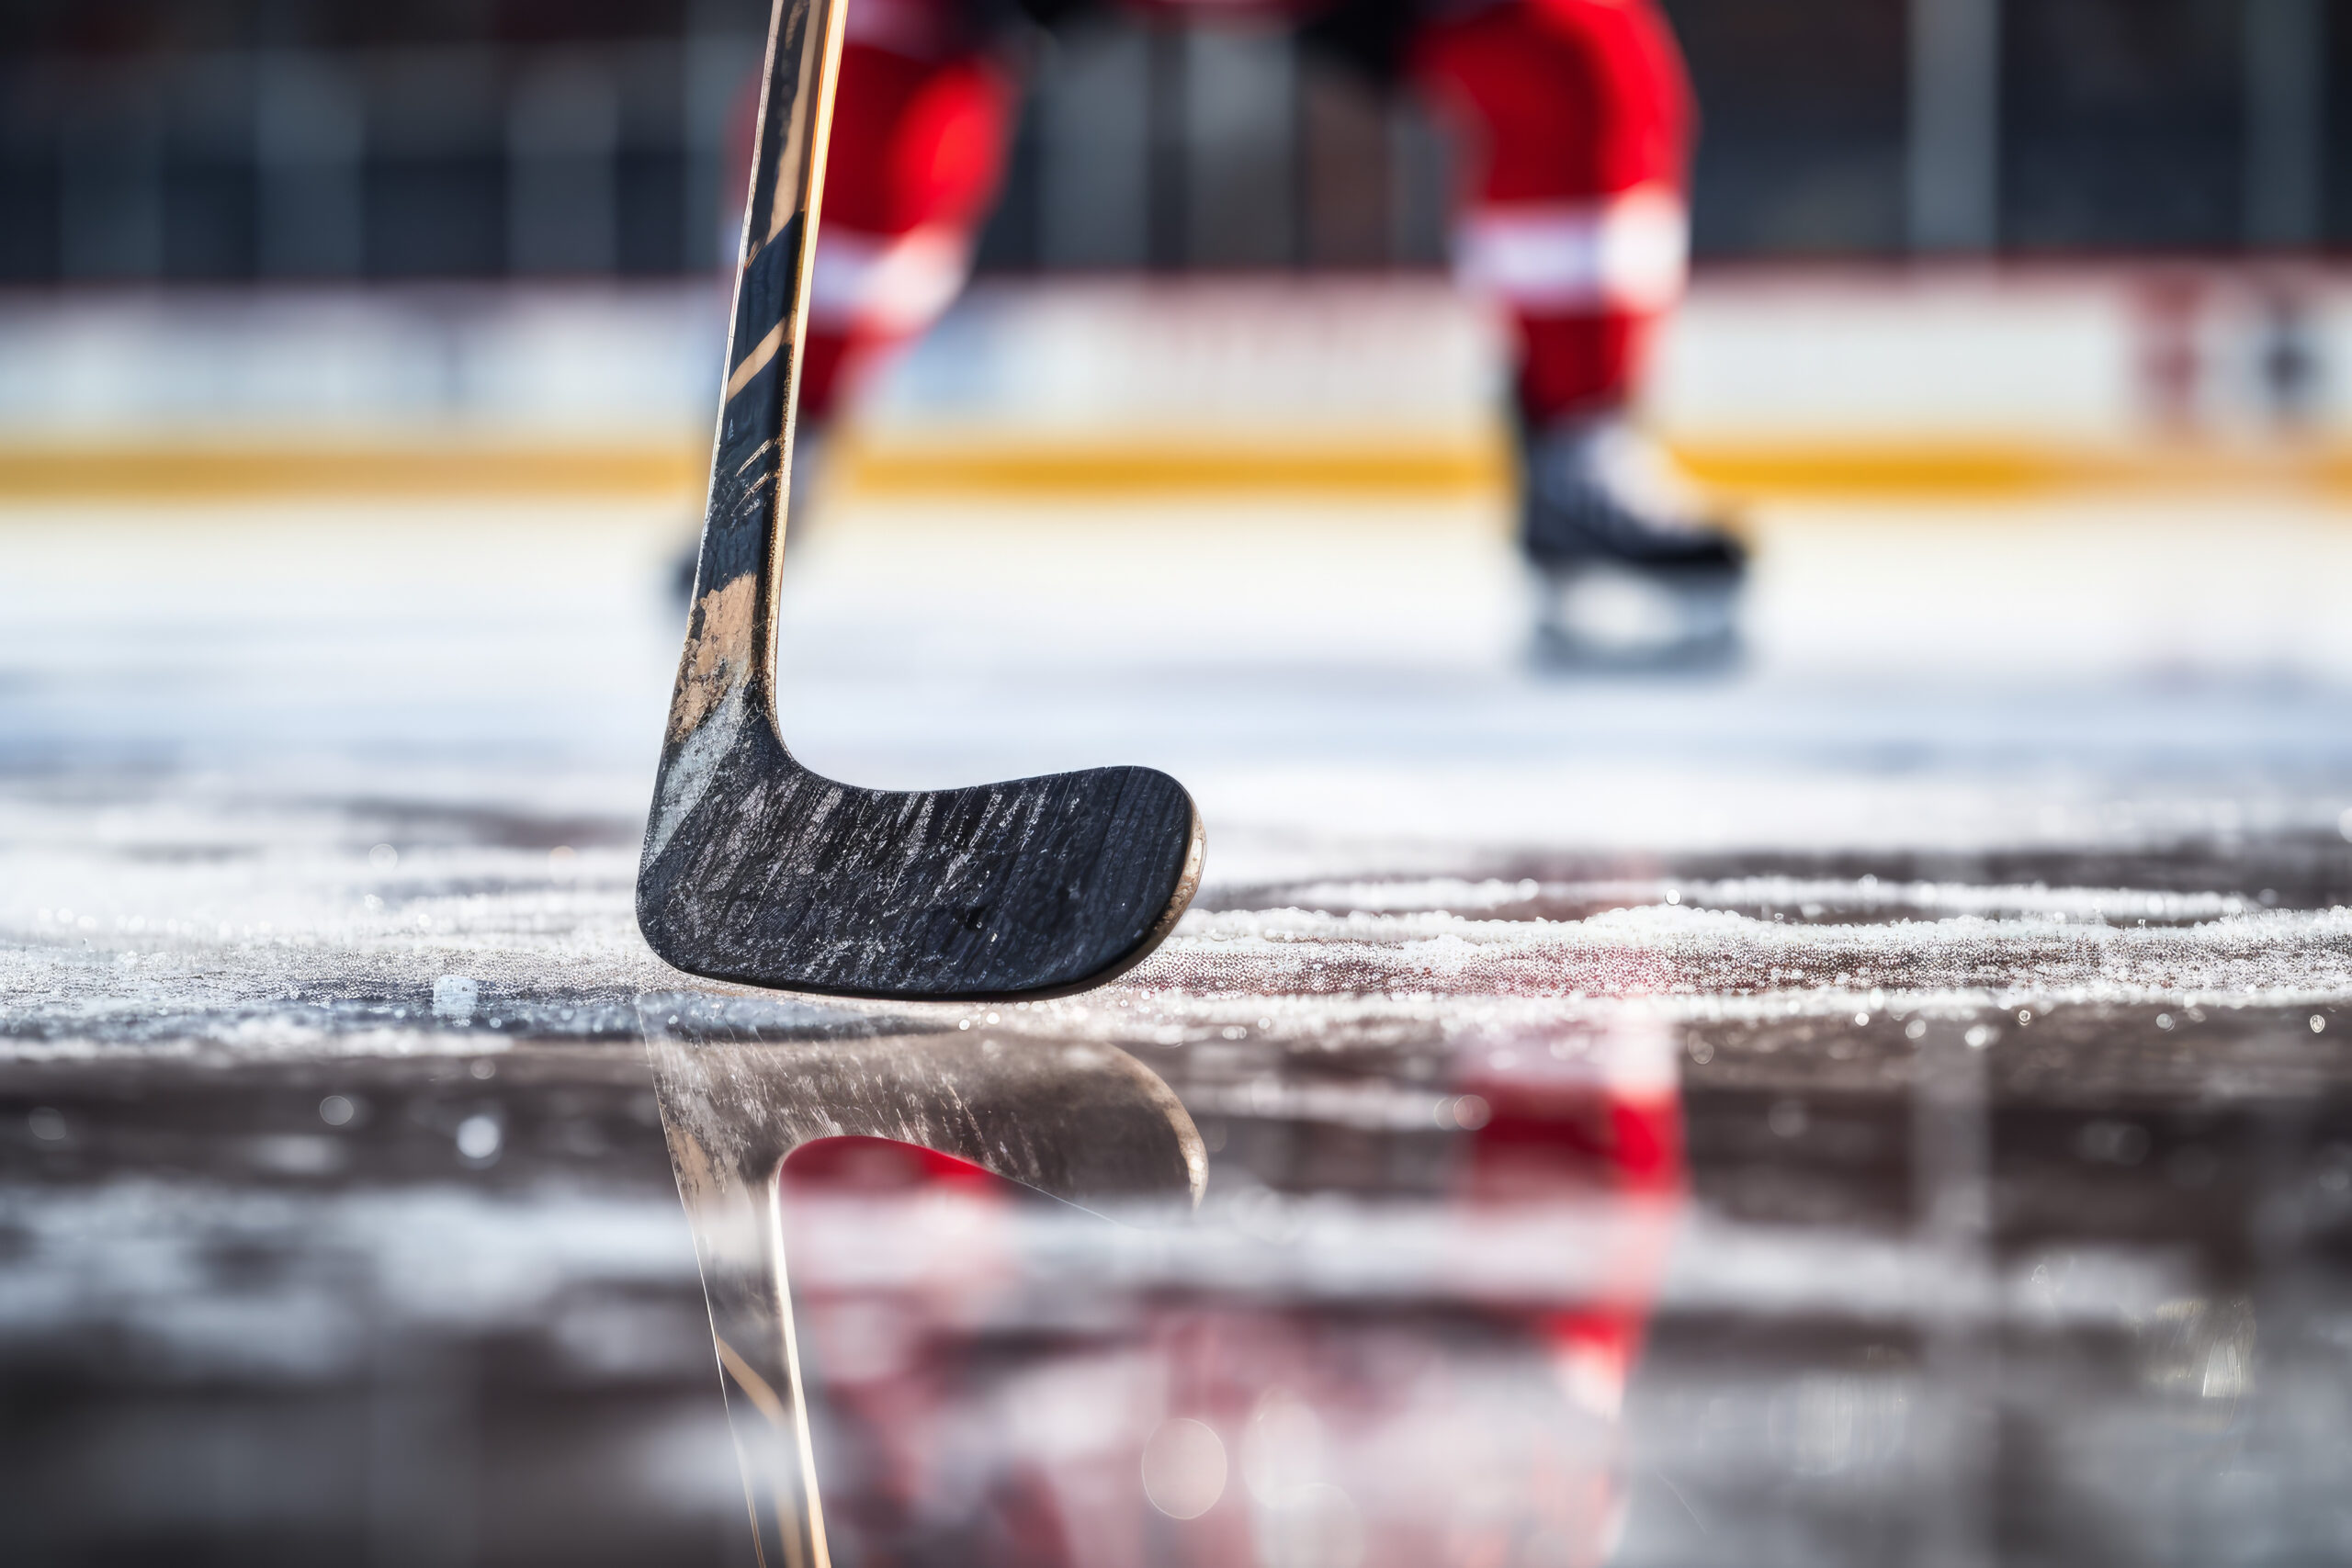 hockey players feet blurred in background, hockey stick on ice in focus